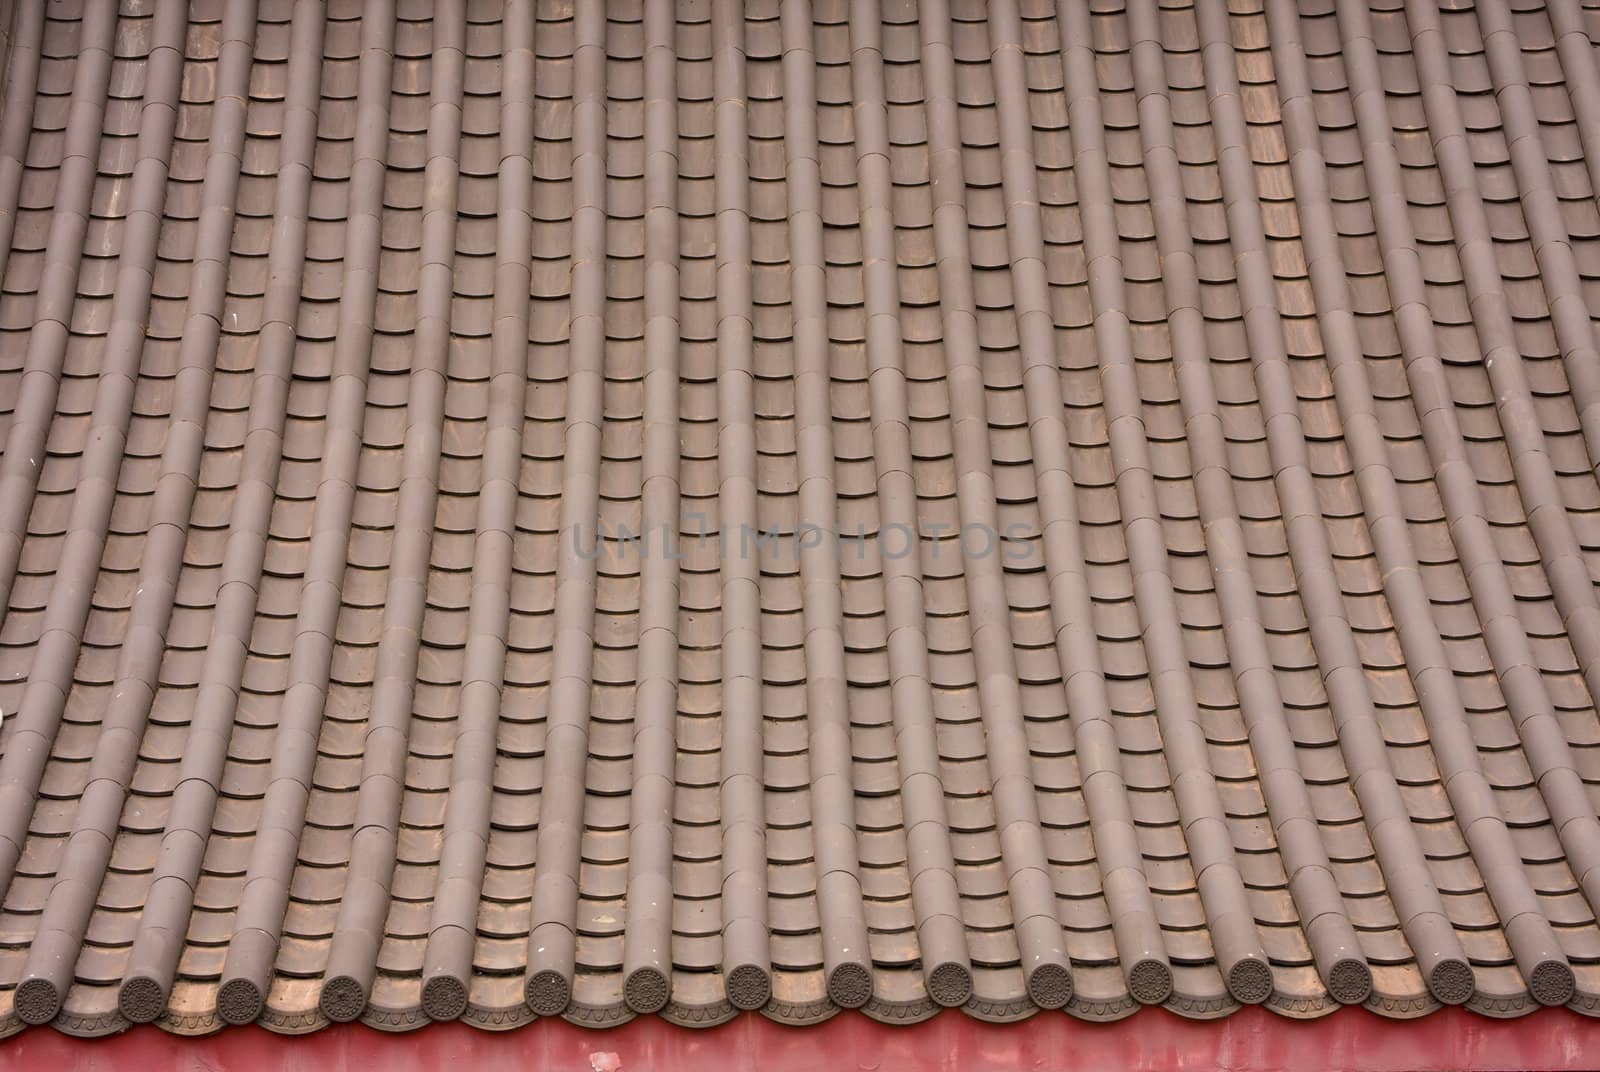 Close up shot of some chinese style roof tiles.

